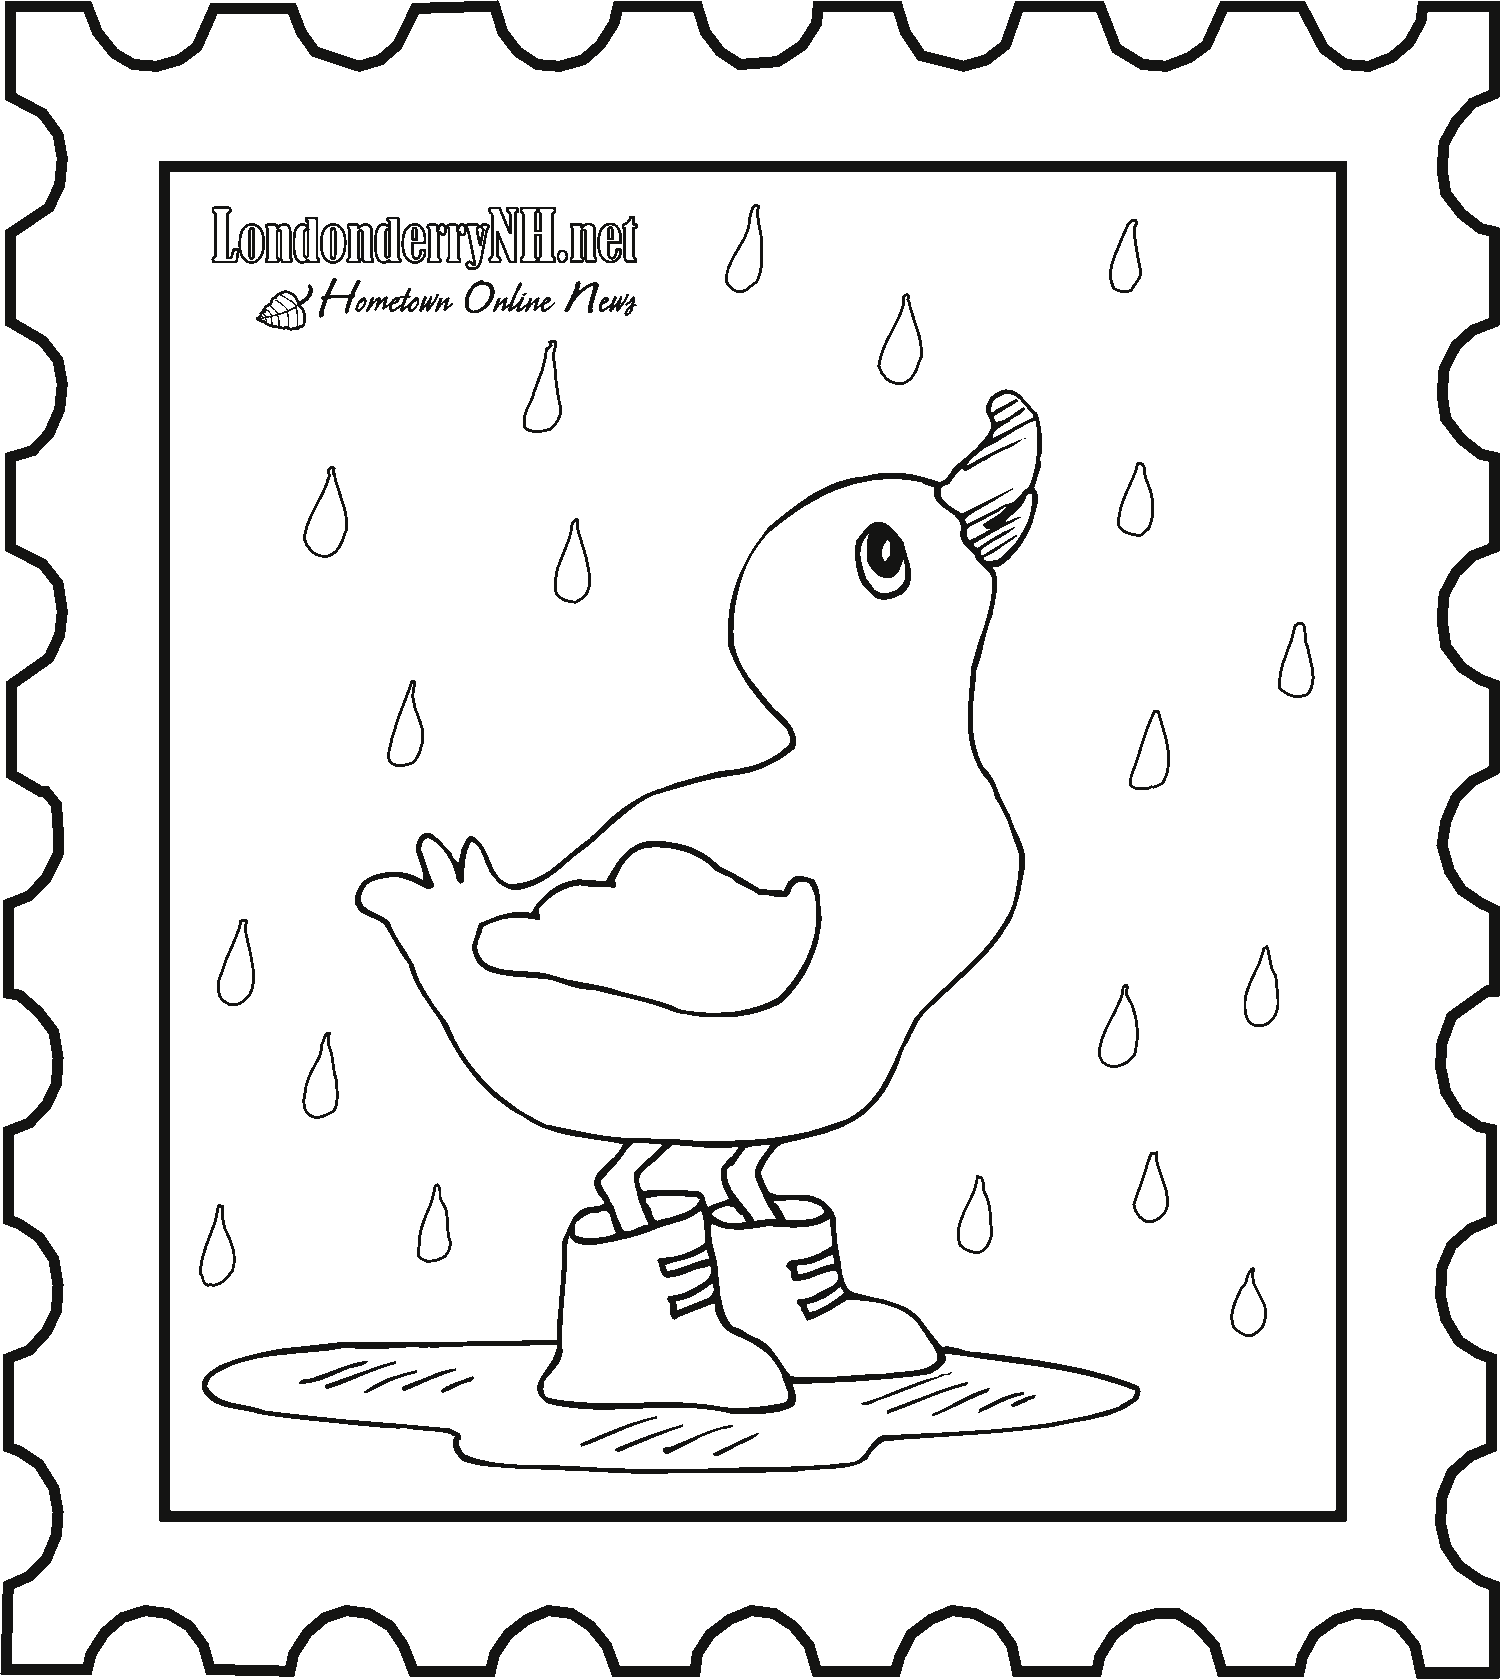 Rainy Day Pictures To Color - Coloring Pages for Kids and for Adults